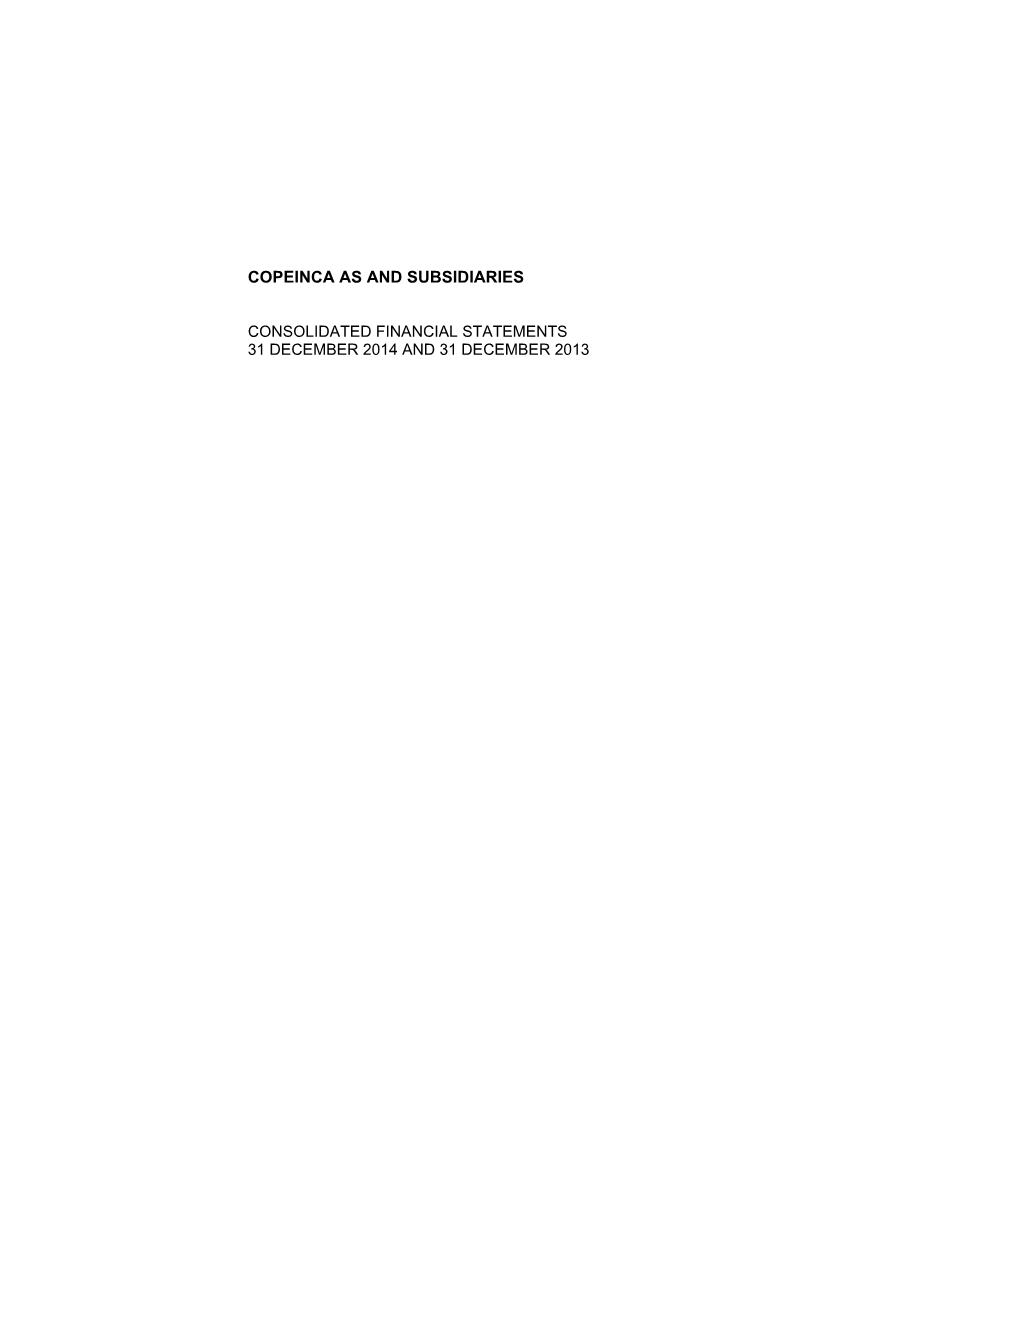 Copeinca As and Subsidiaries Consolidated Financial